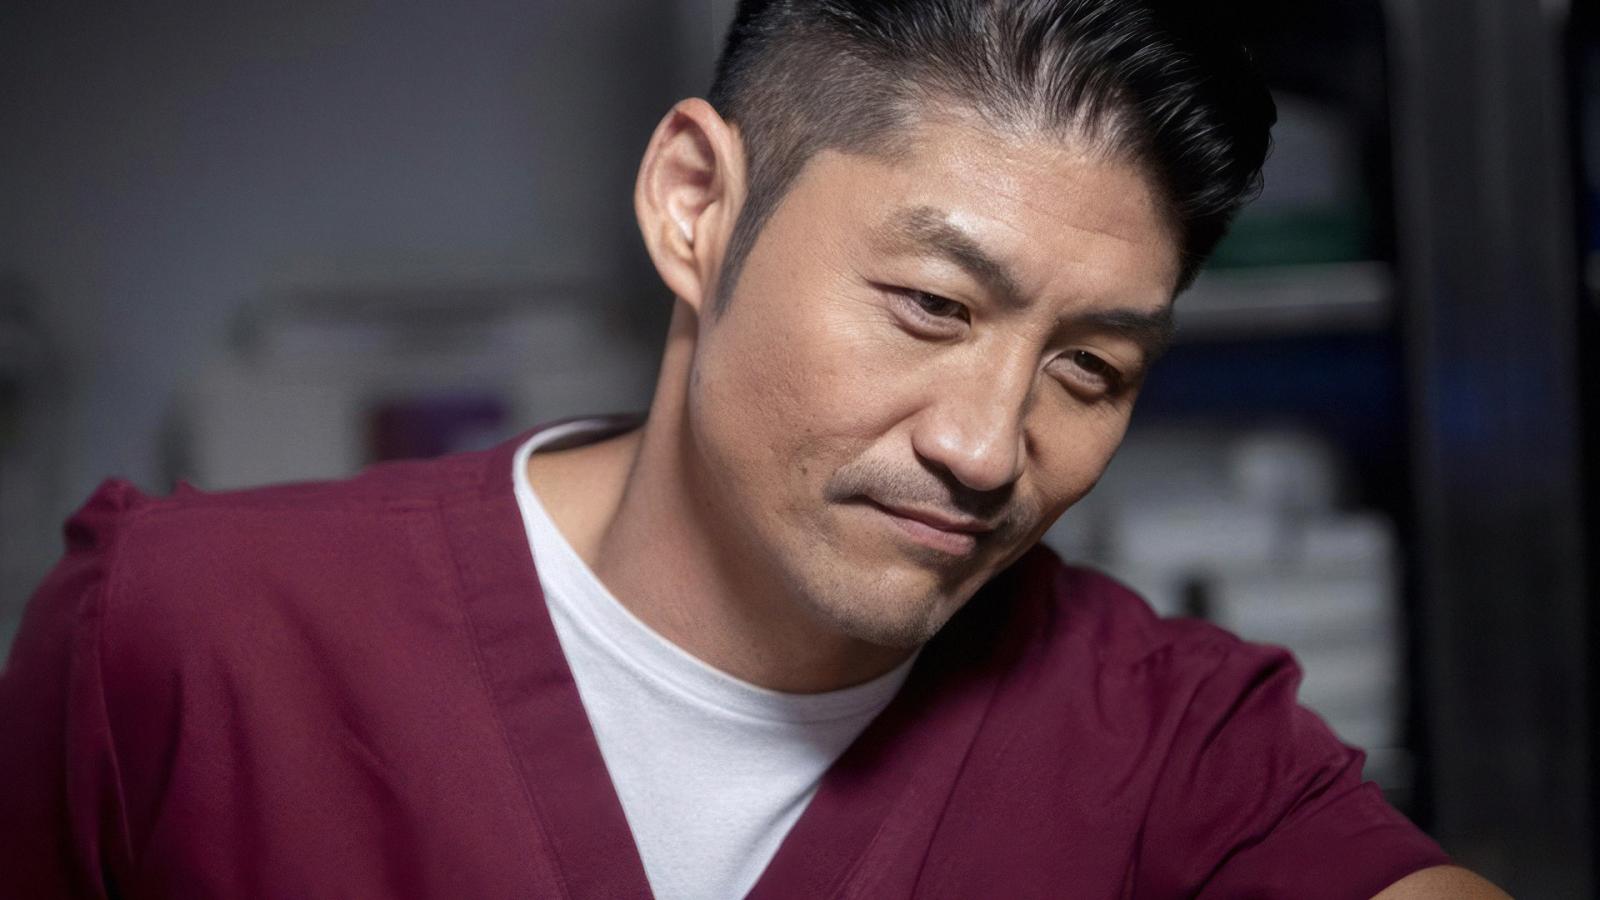 Move Over, McDreamy: Ranking the 8 Hottest Male Doctors on TV - image 3